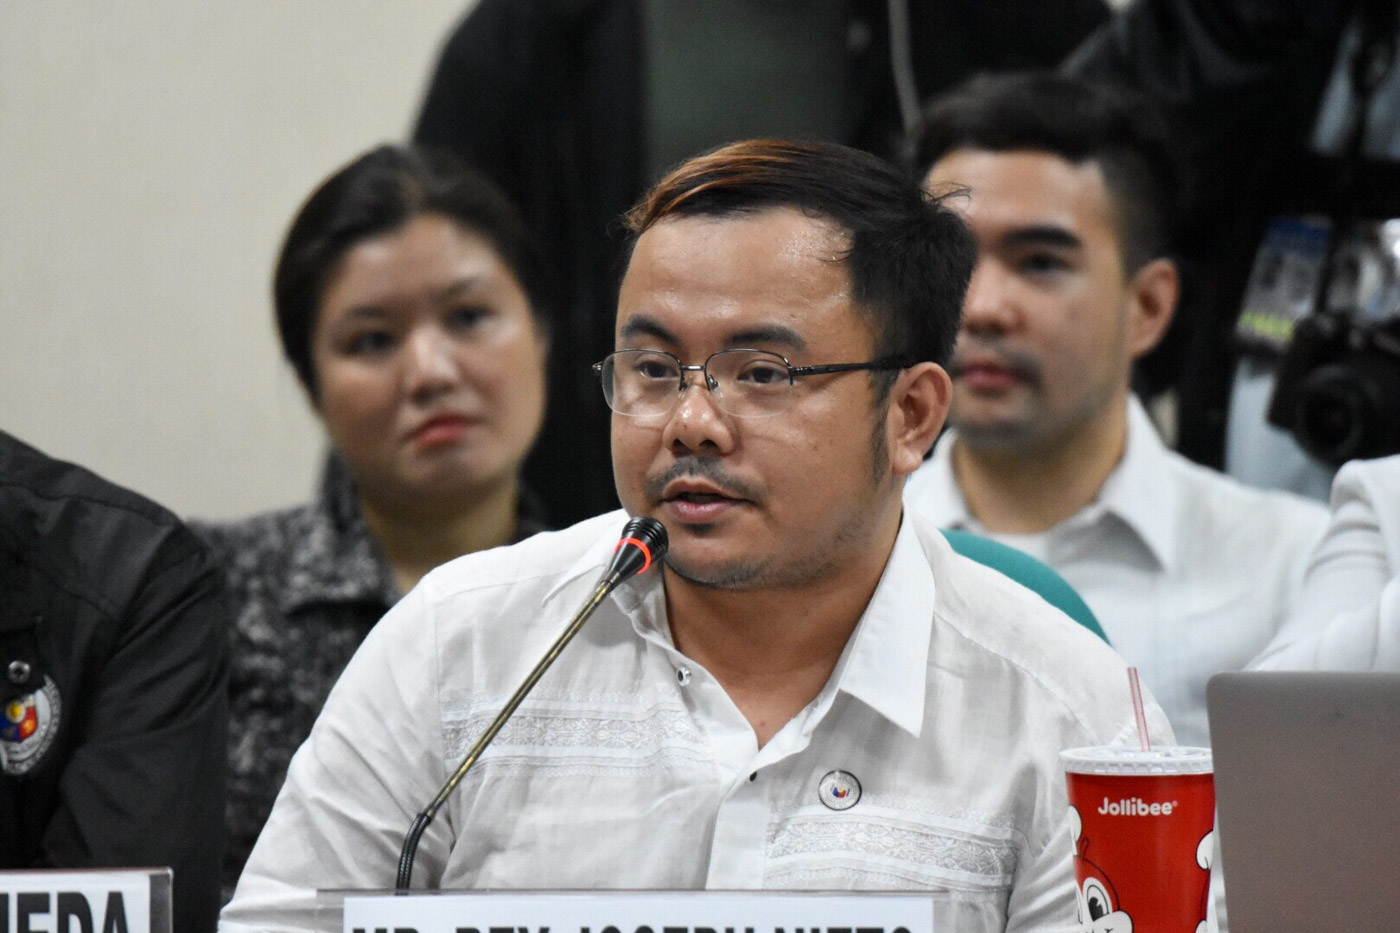 UNDER FIRE. Blogger RJ Nieto is reprimanded for his remarks about a Rappler reporter. File photo by Angie de Silva/Rappler 